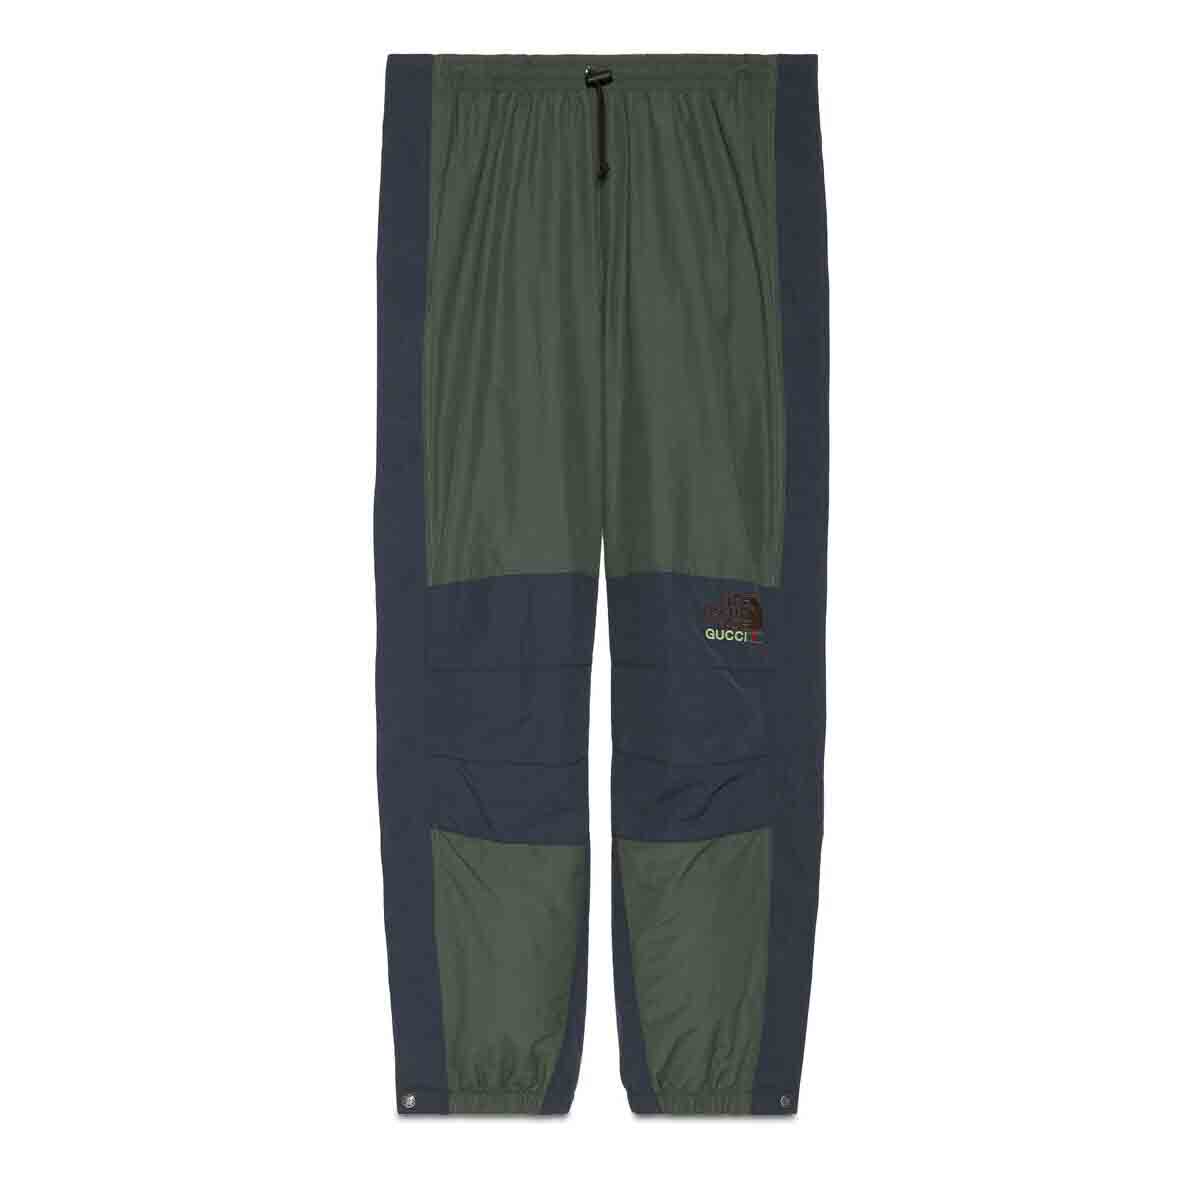 Gucci x The North Face Pant Green/Blue